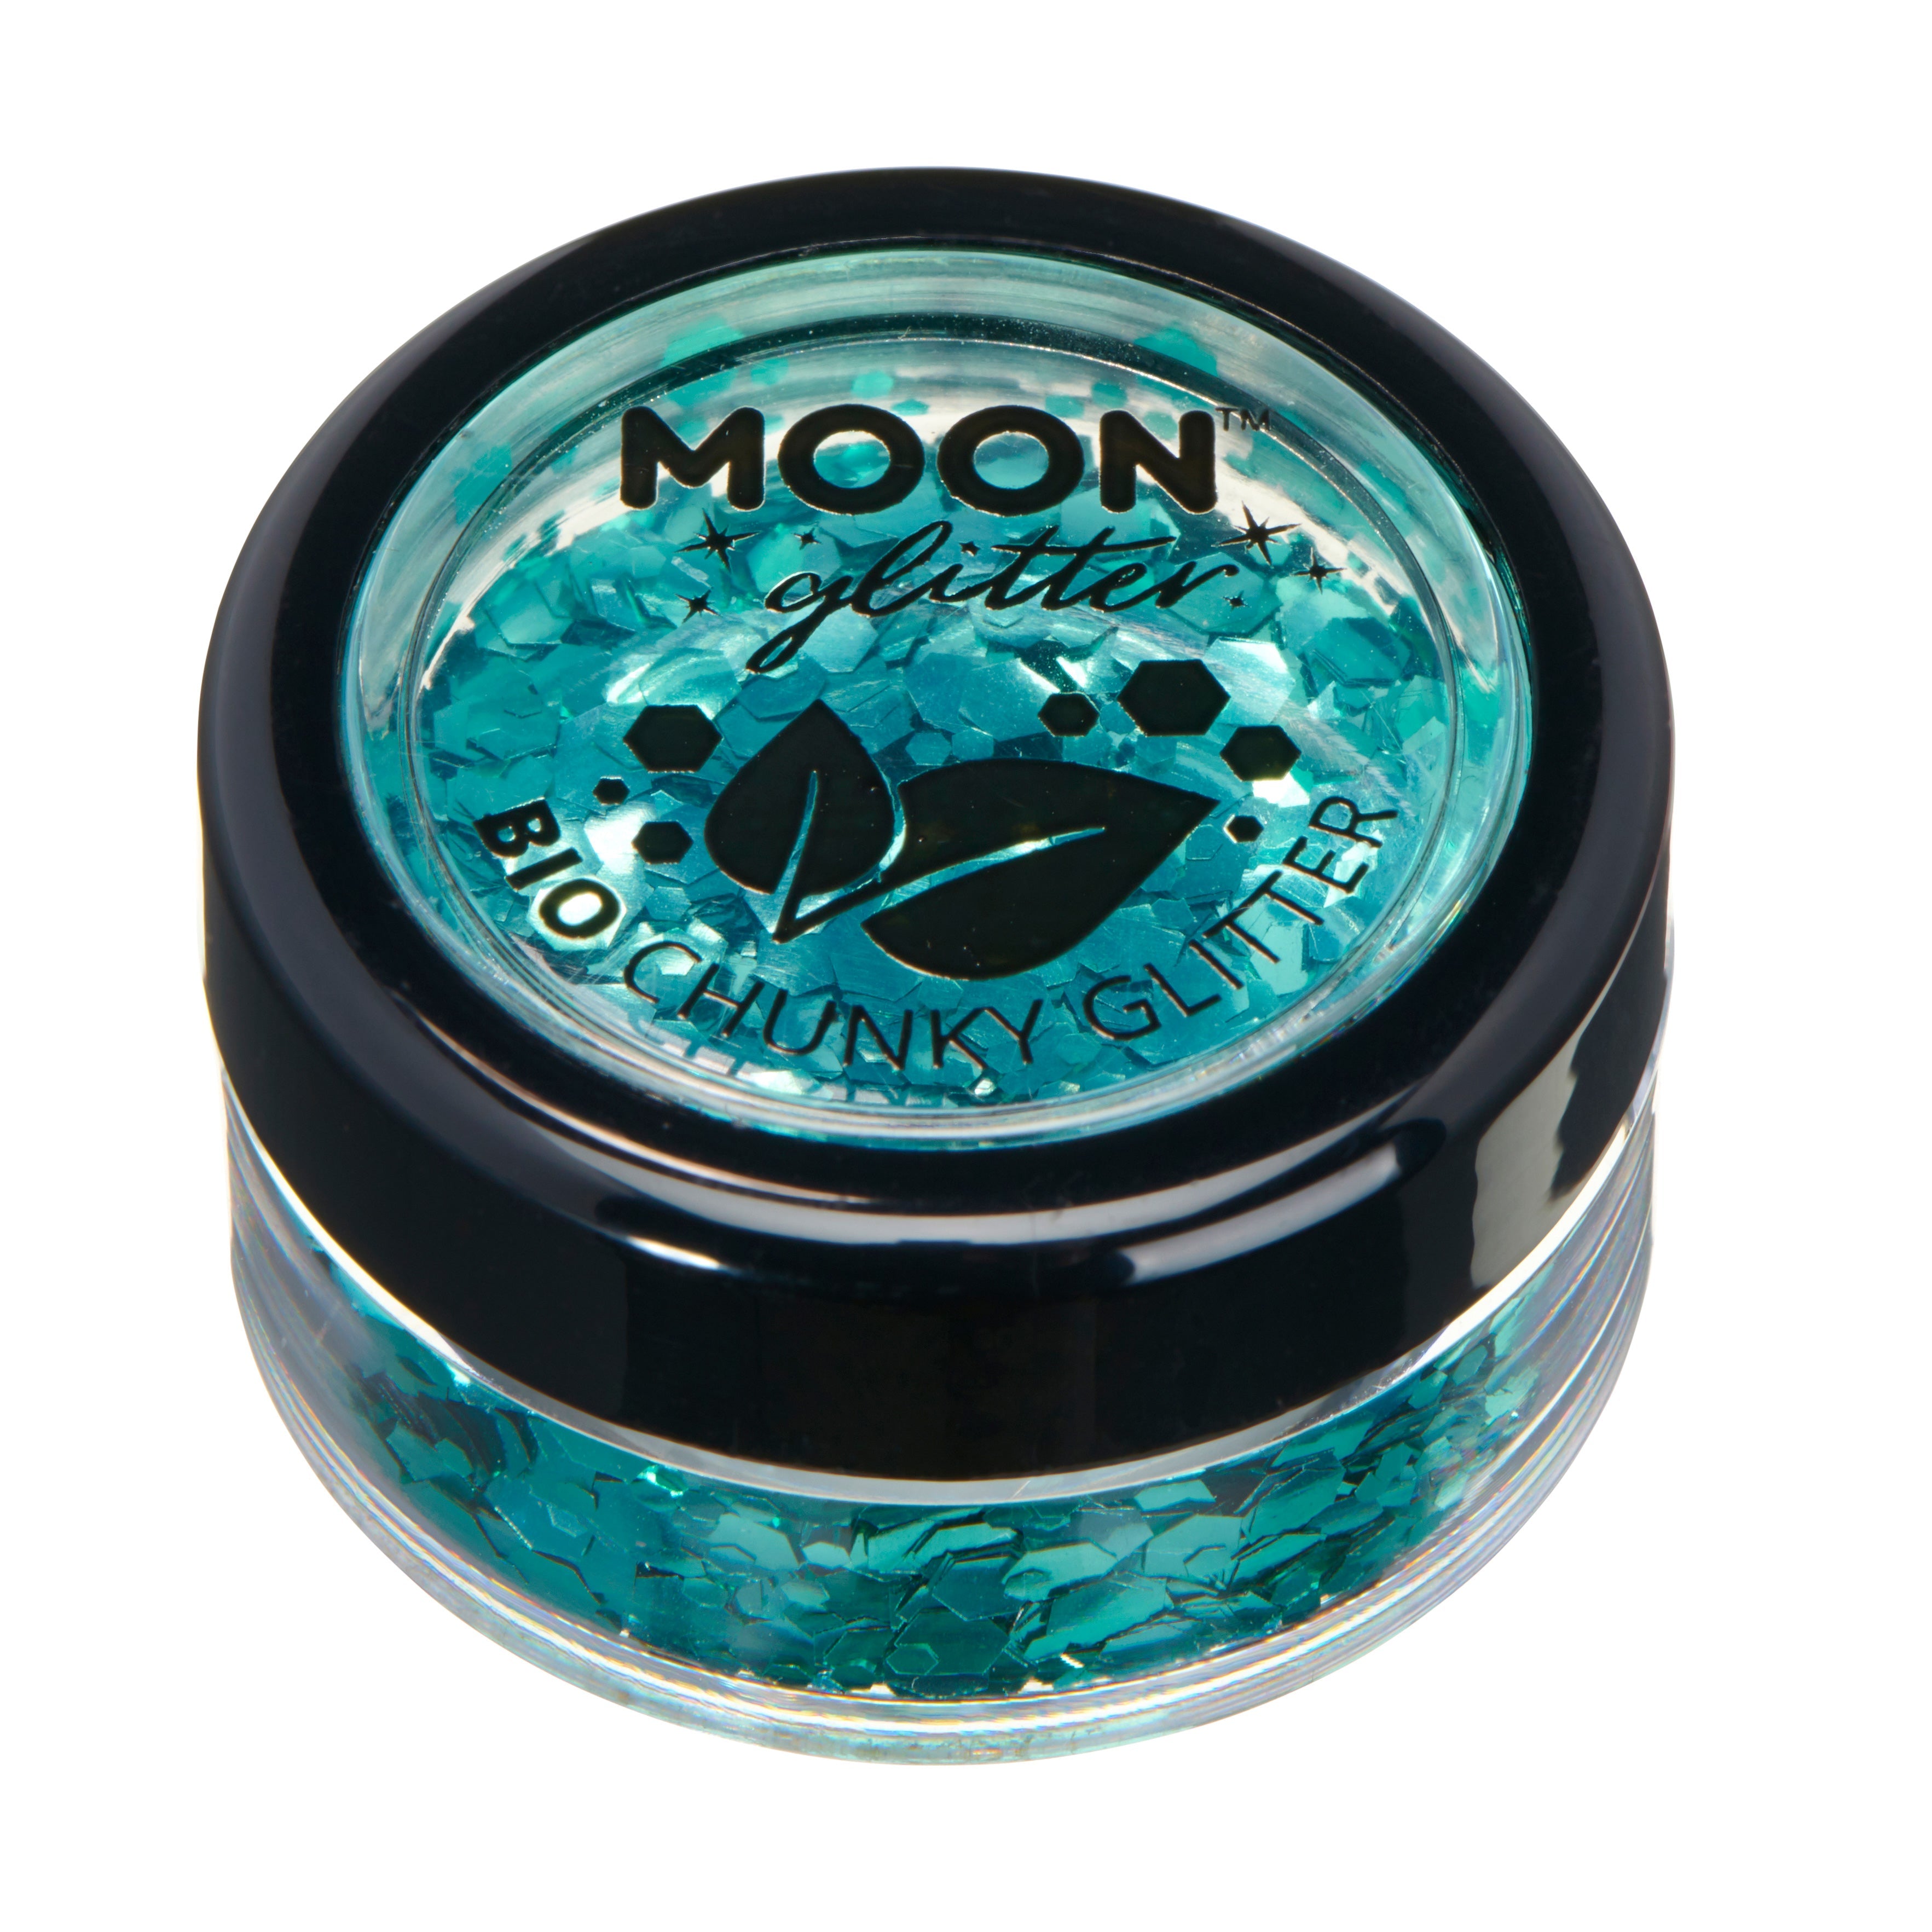 Turquoise - BIO Chunky Face & Body Glitter, 3g. Cosmetically certified, FDA & Health Canada compliant, cruelty free and vegan.